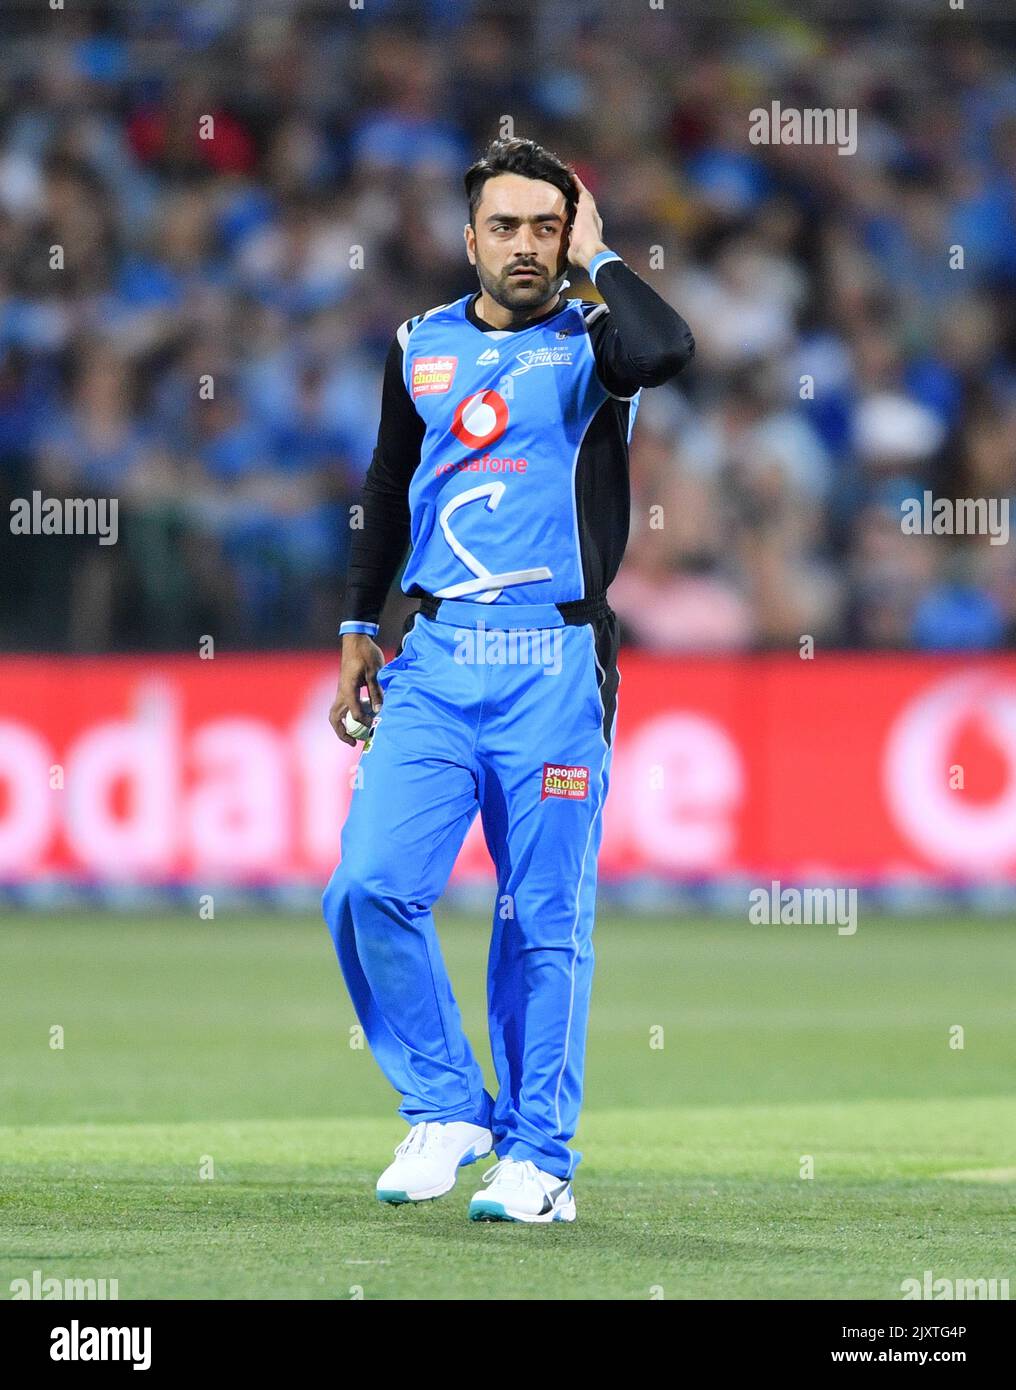 Rashid Khan of the Adelaide Strikers during the Big Bash League (BBL) match between the Adelaide Strikers and the Sydney Thunder at Adelaide Oval in Adelaide, Monday, December 31, 2018